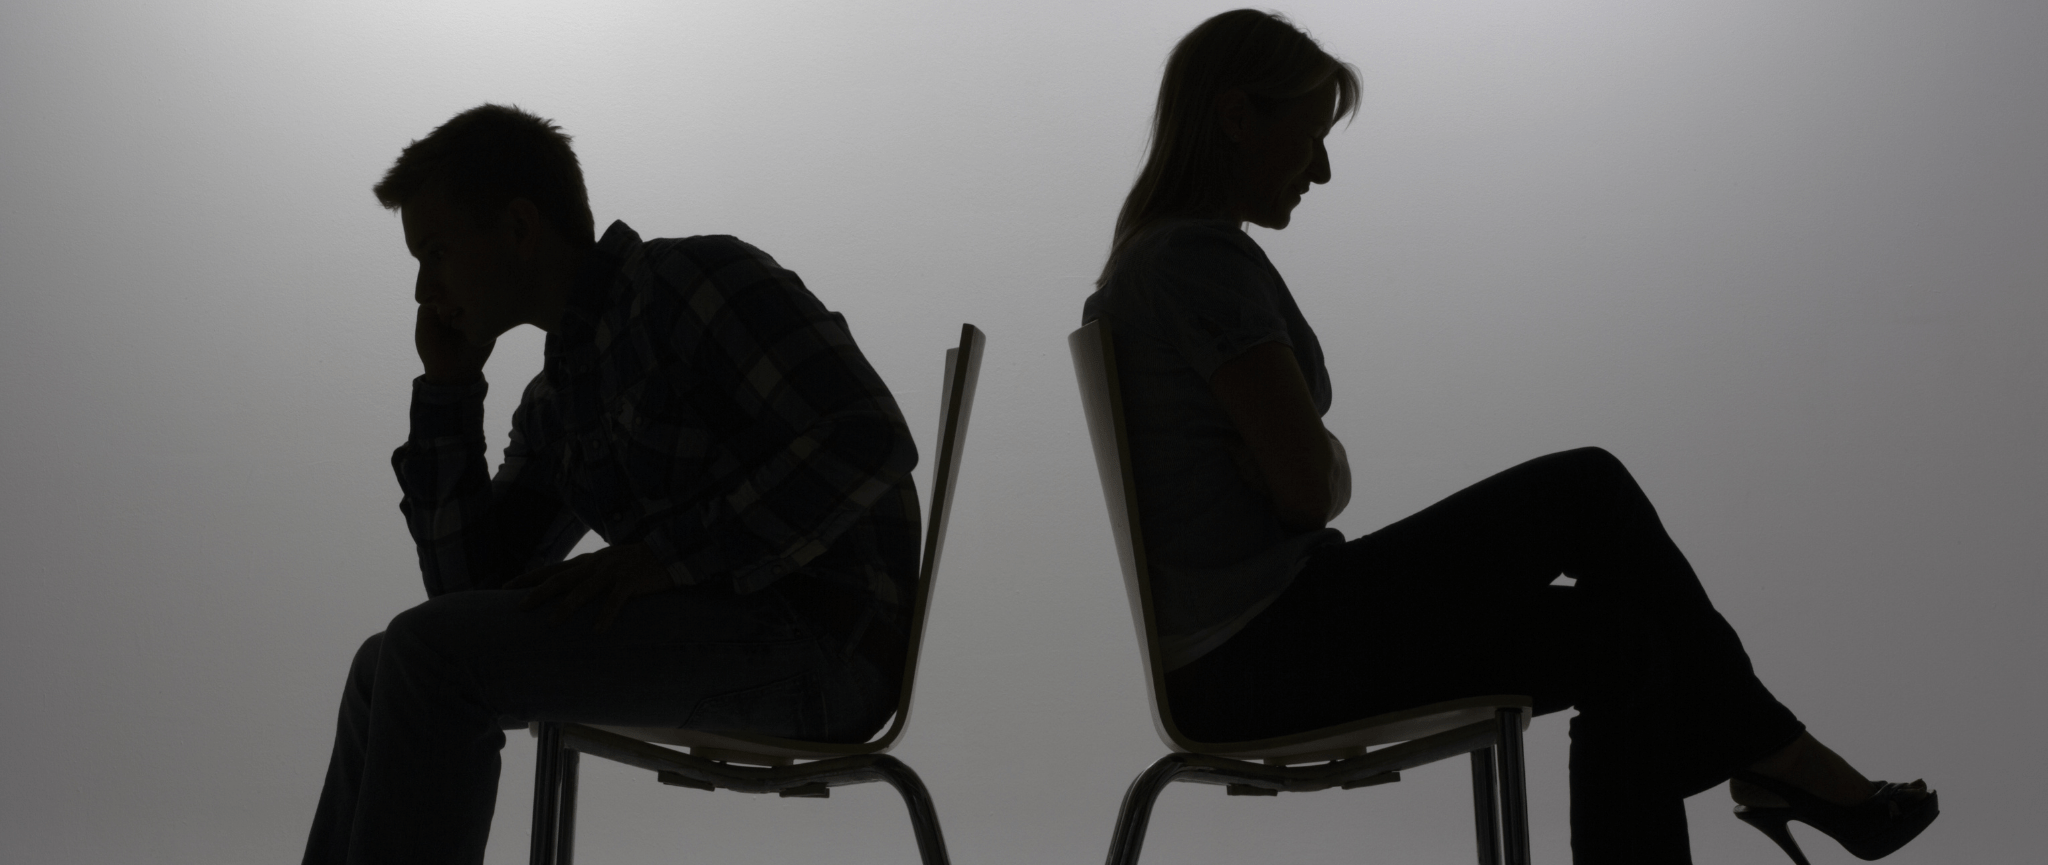 A silhouette of a man and a woman sitting opposite to each other